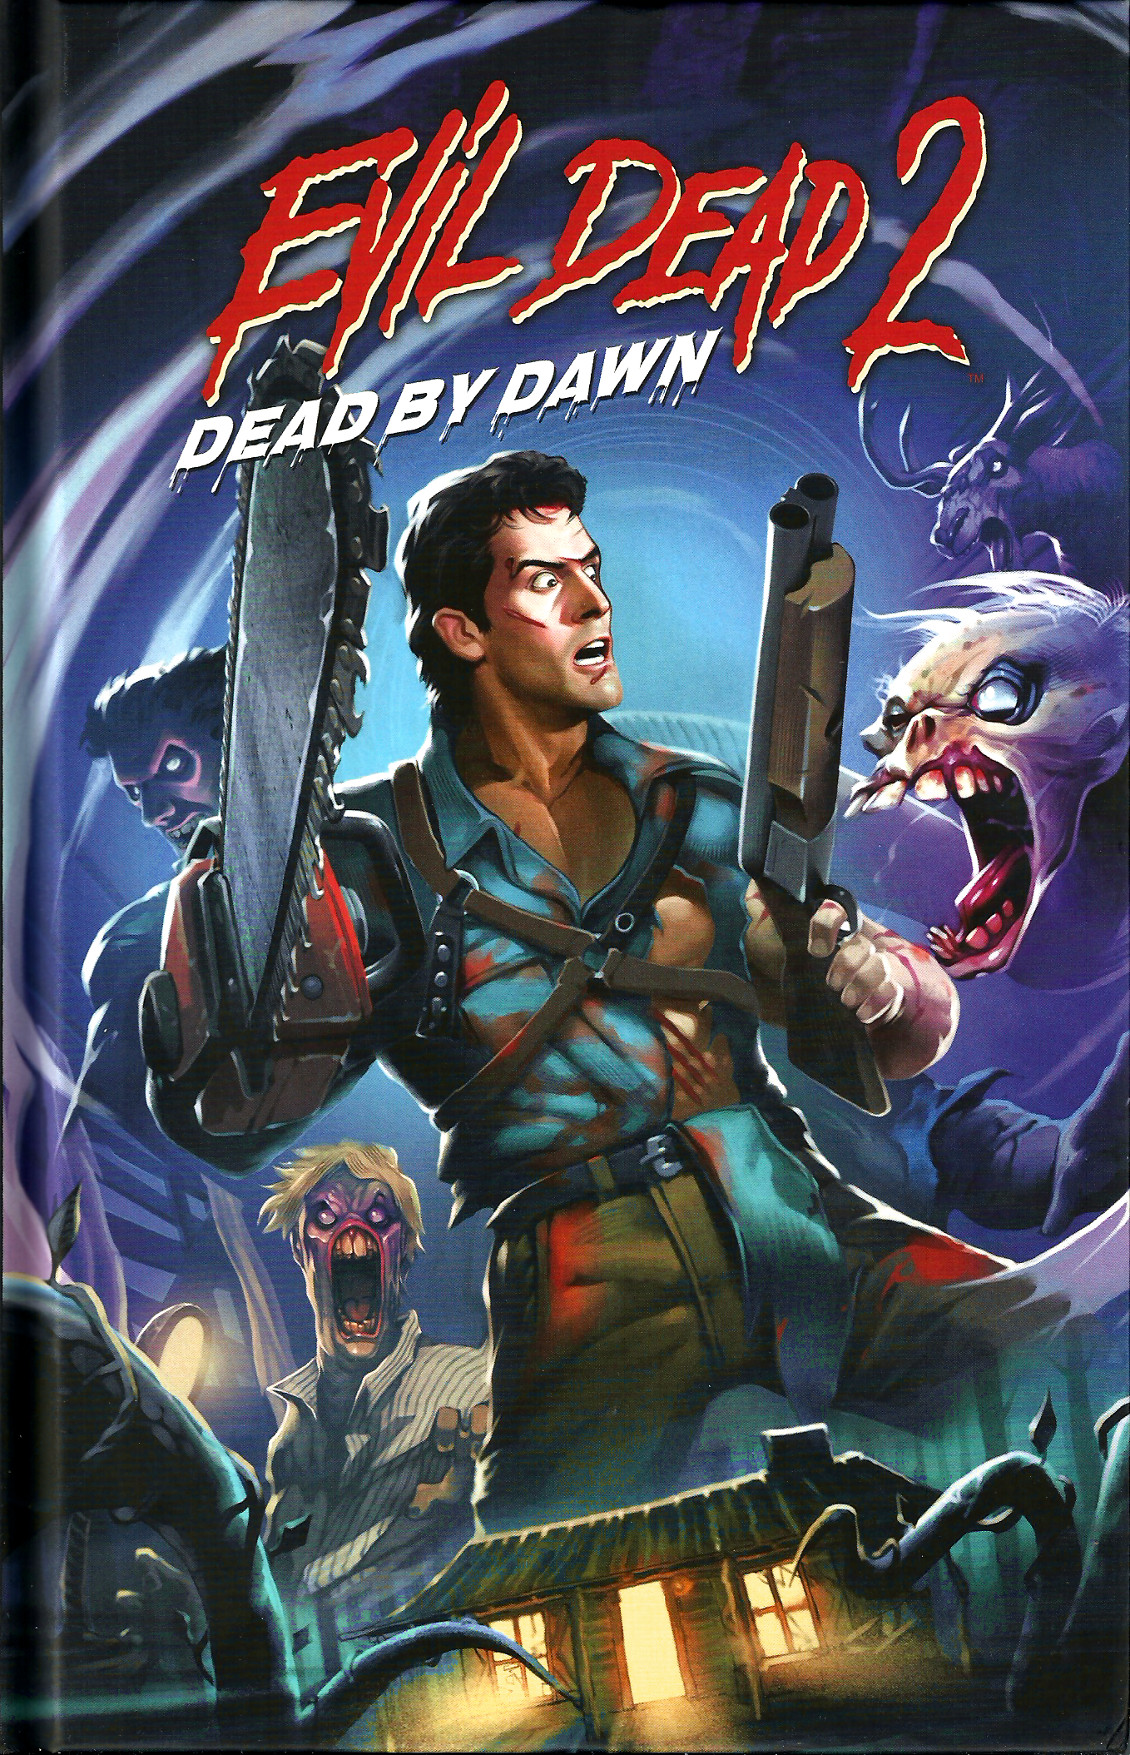 the evil dead 2